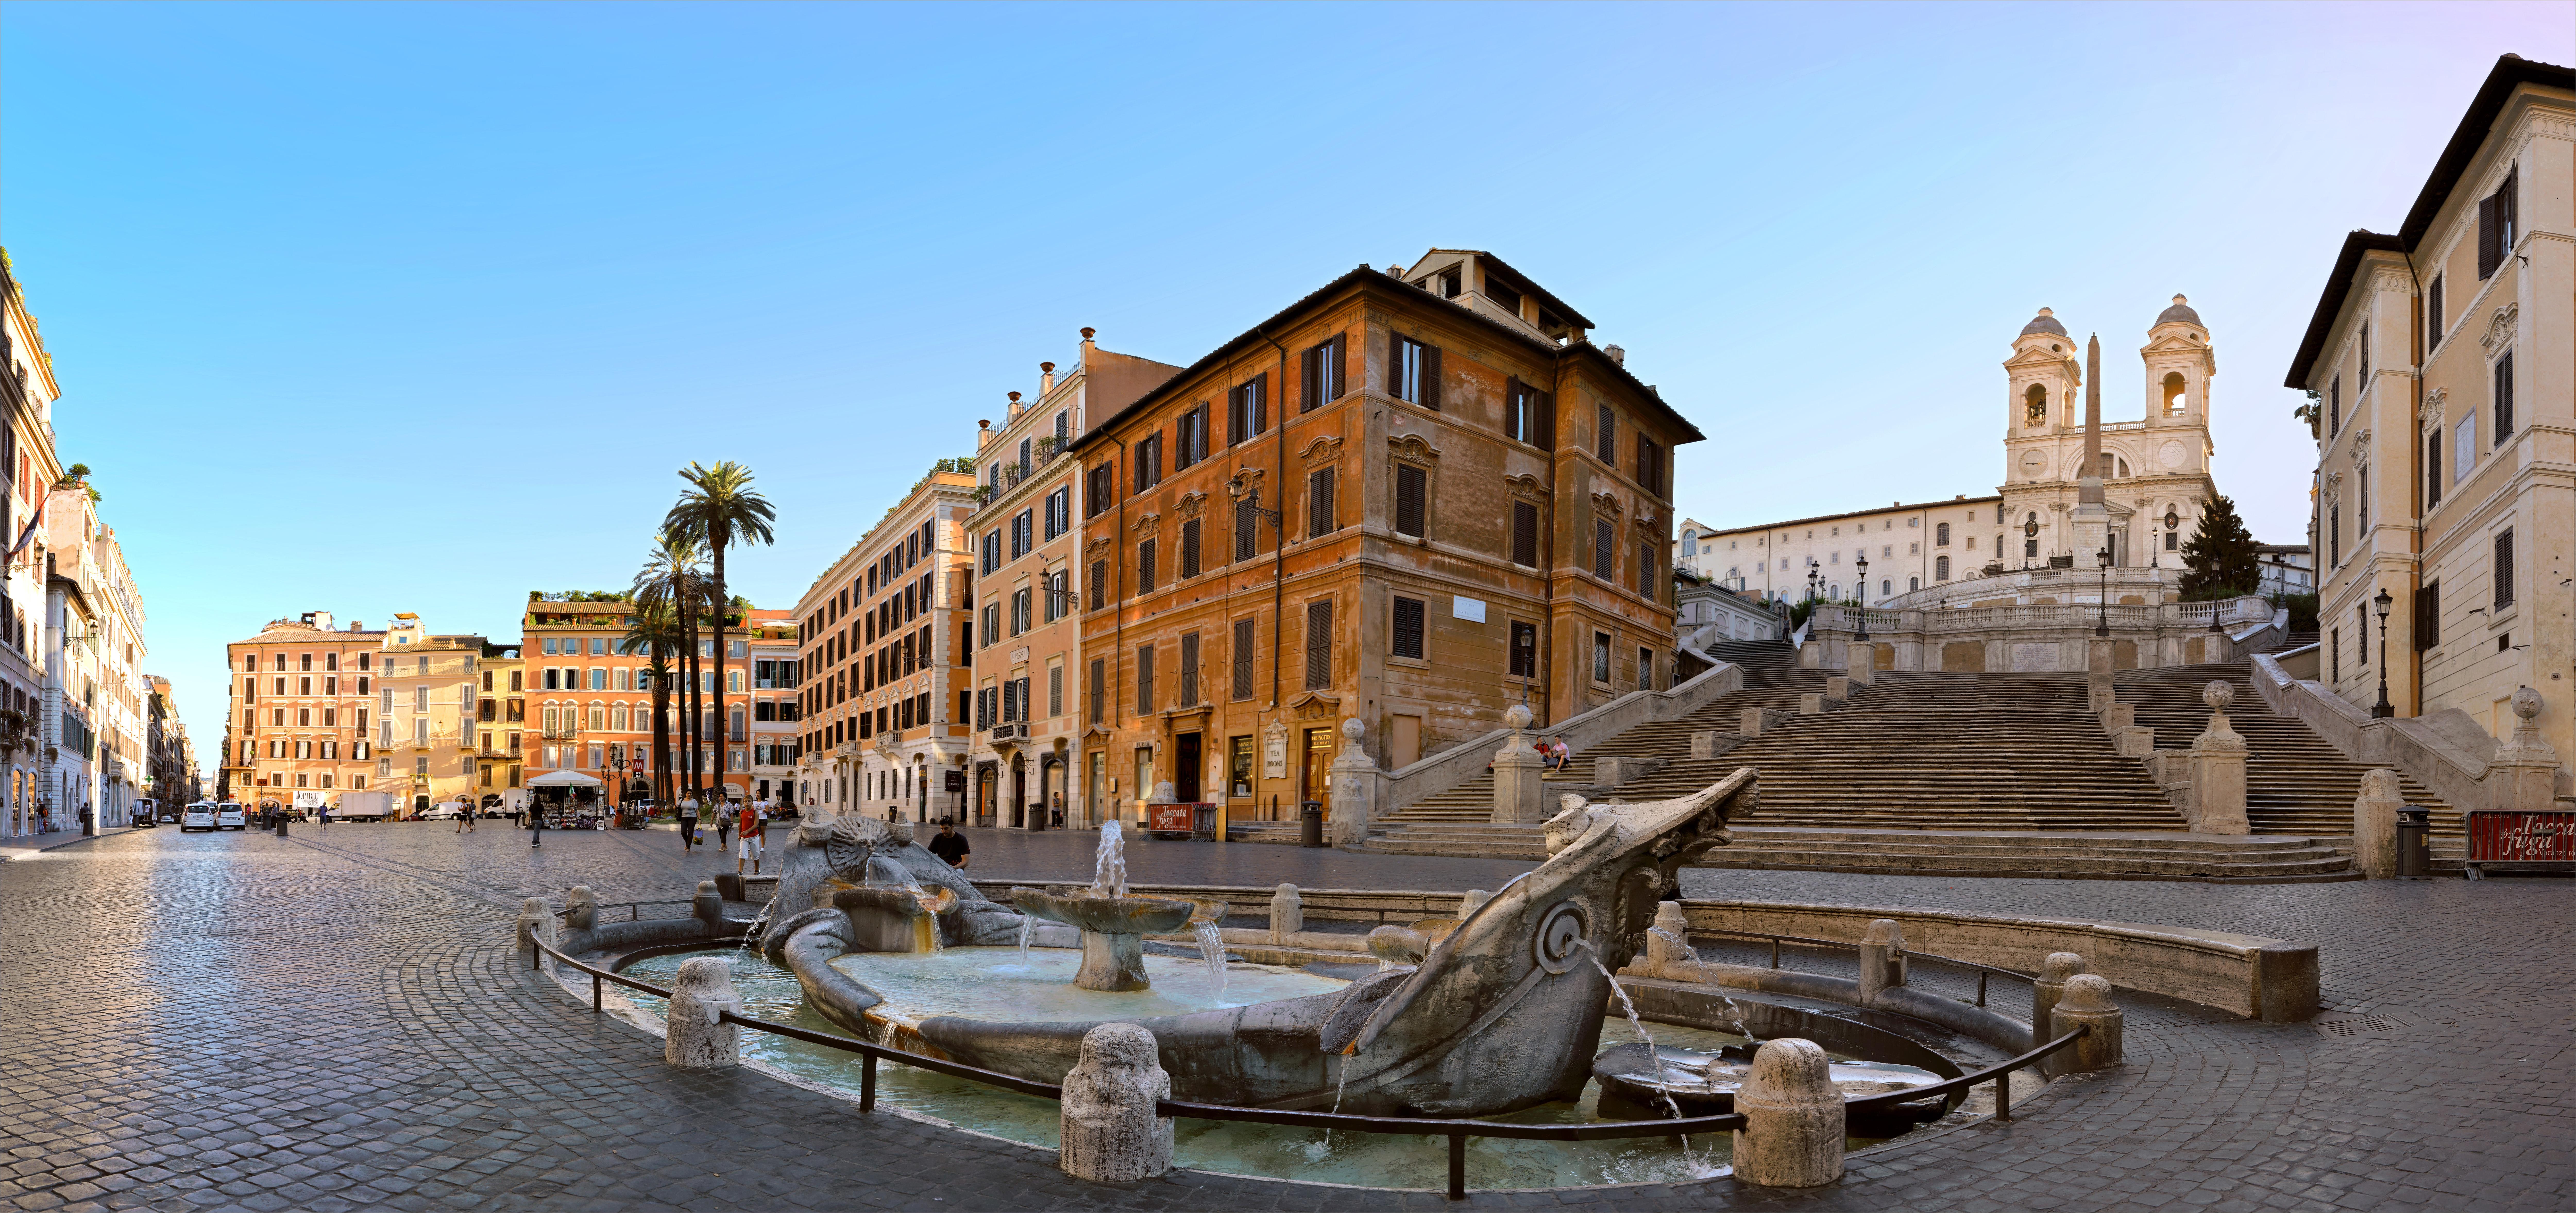 Jean Pierre De Neef - The Piazza di Spagna, Roma - Italy - Contemporary  Panoramic Color Photography For Sale at 1stDibs